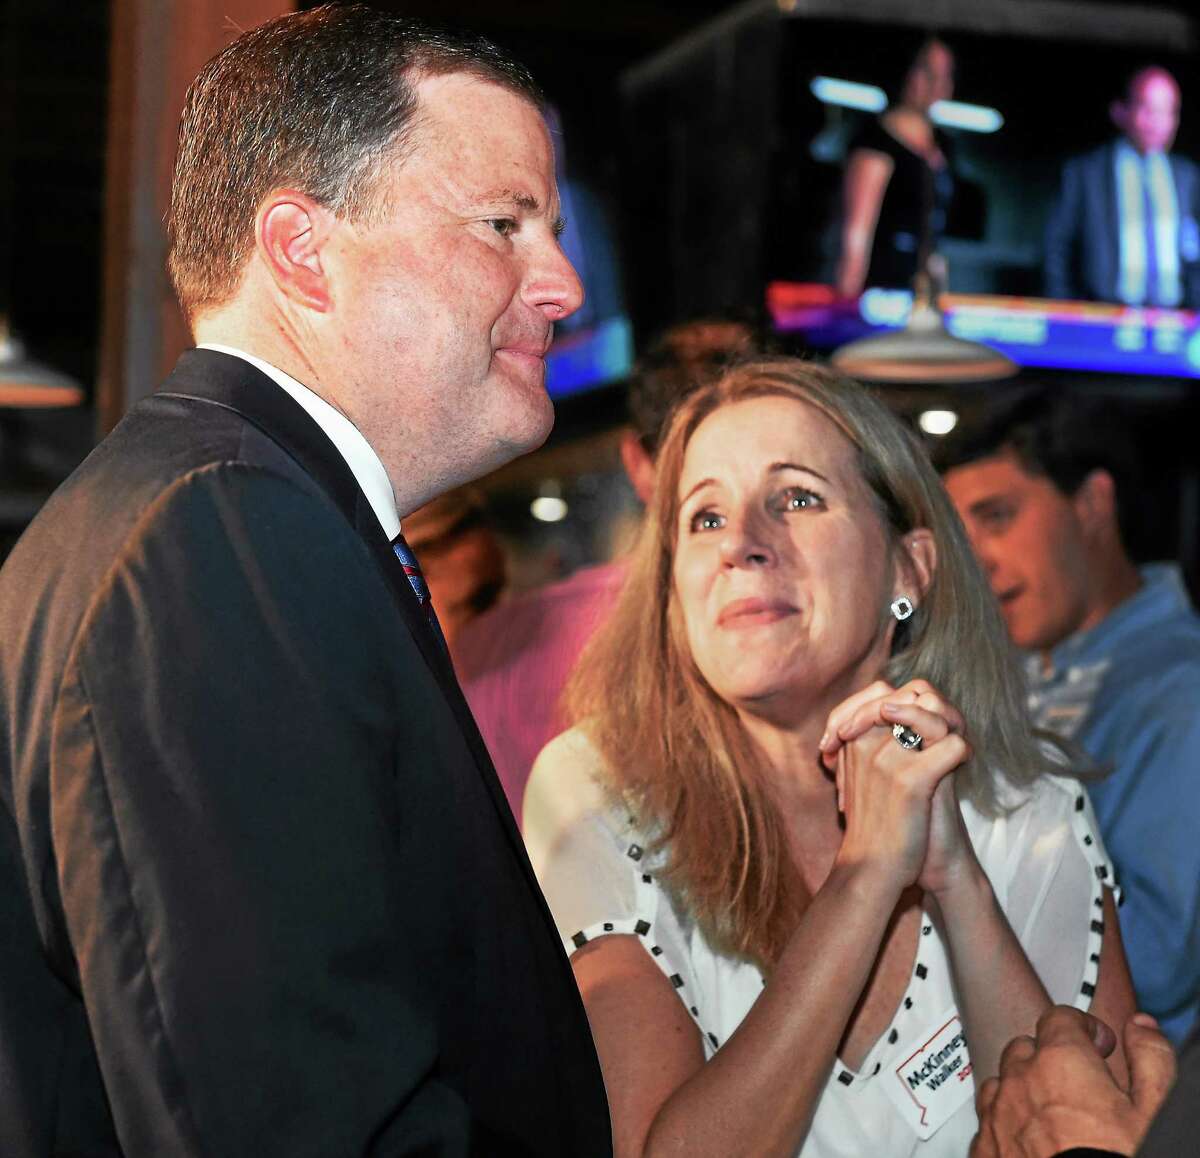 State Sen. John McKinney stops to talk with supporter Jennifer Verraneault after conceding the Republican primary to Tom Foley Tuesday night. McKinney appointed Verraneault to the task force for the study of care and custody of minor children and legal disputes.